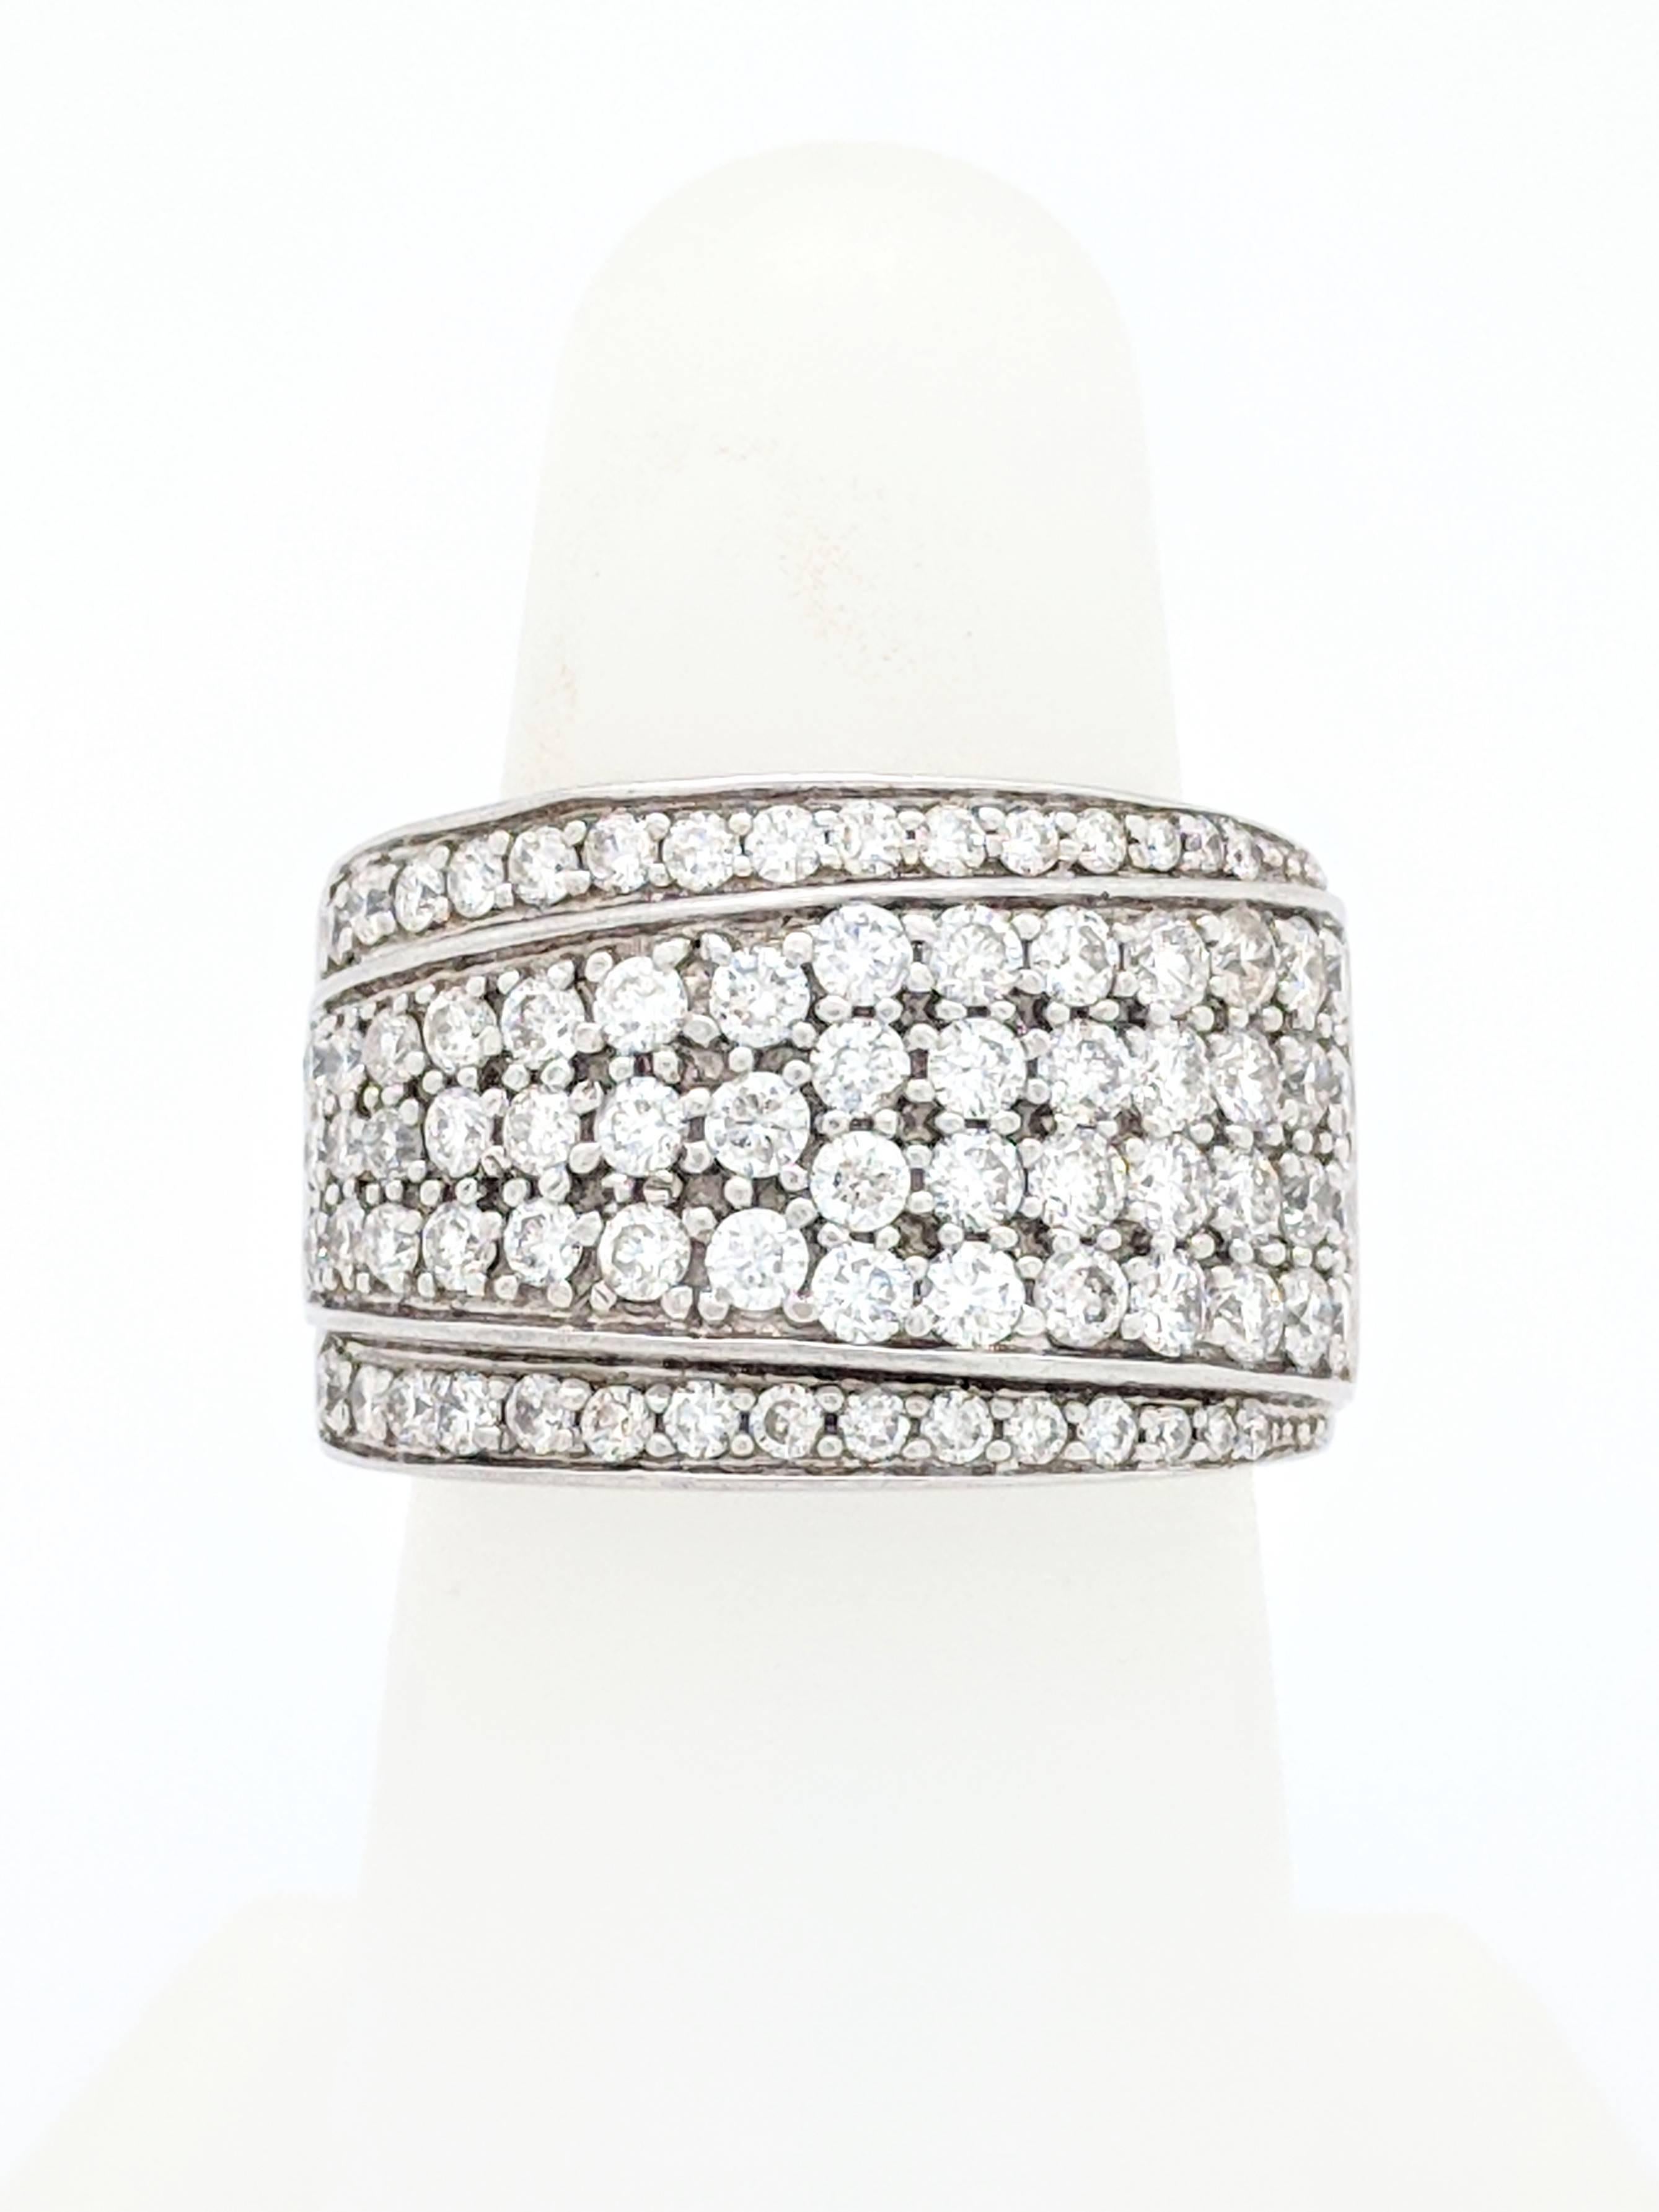 Unique 14KT White Gold 2ctw Diamond Cluster Right Hand Ring Size 6

You are viewing a Unique Diamond Cluster Ring.  This ring features (79) natural round diamonds that we estimate to be 2ctw, SI1 clarity, and G/H color.  The ring weighs 11 grams and